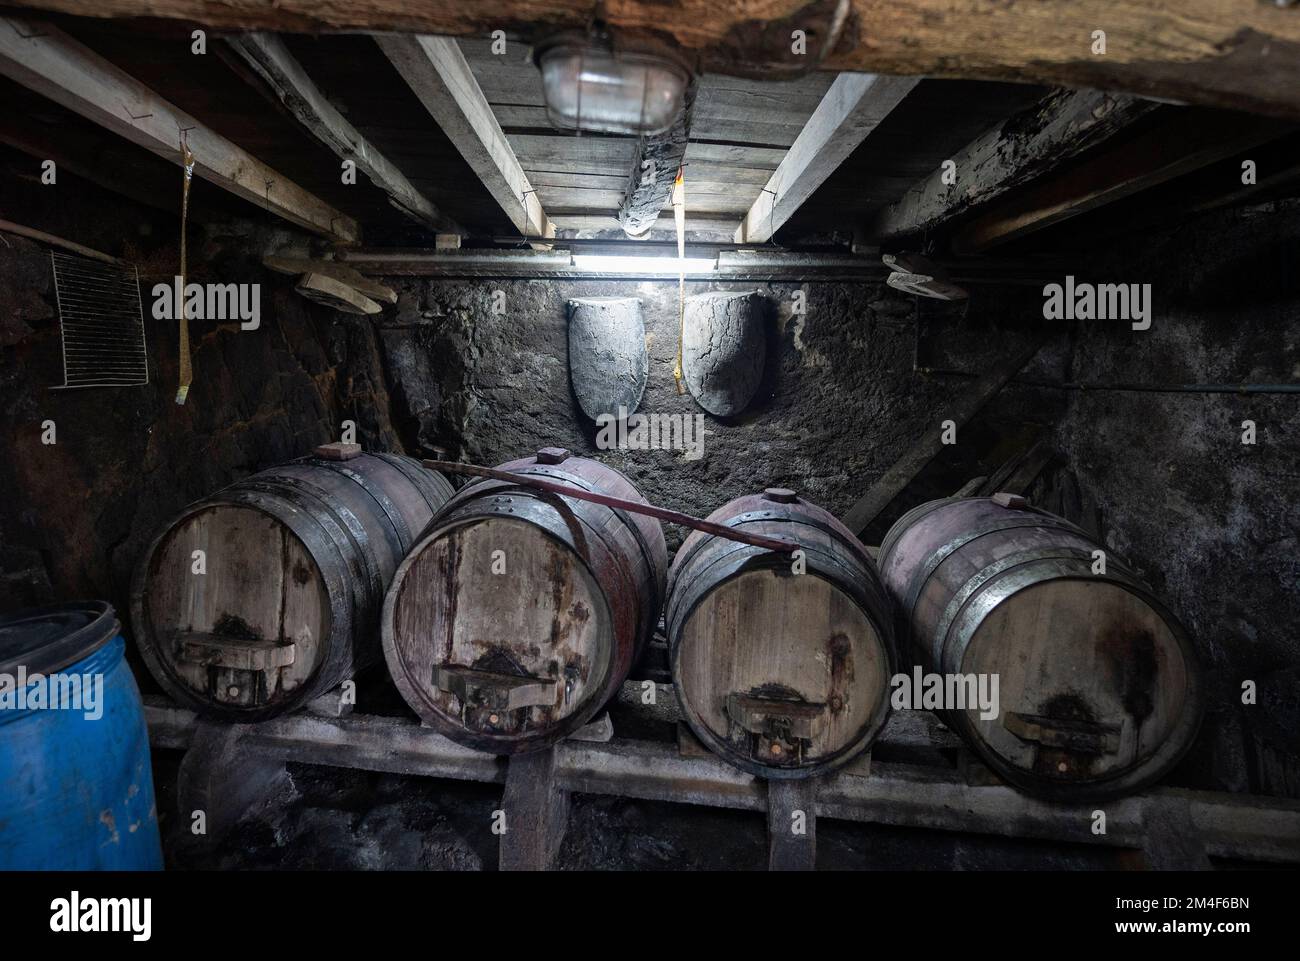 Four wine barrels on a rustic old cellar in the basement of a country house Stock Photo